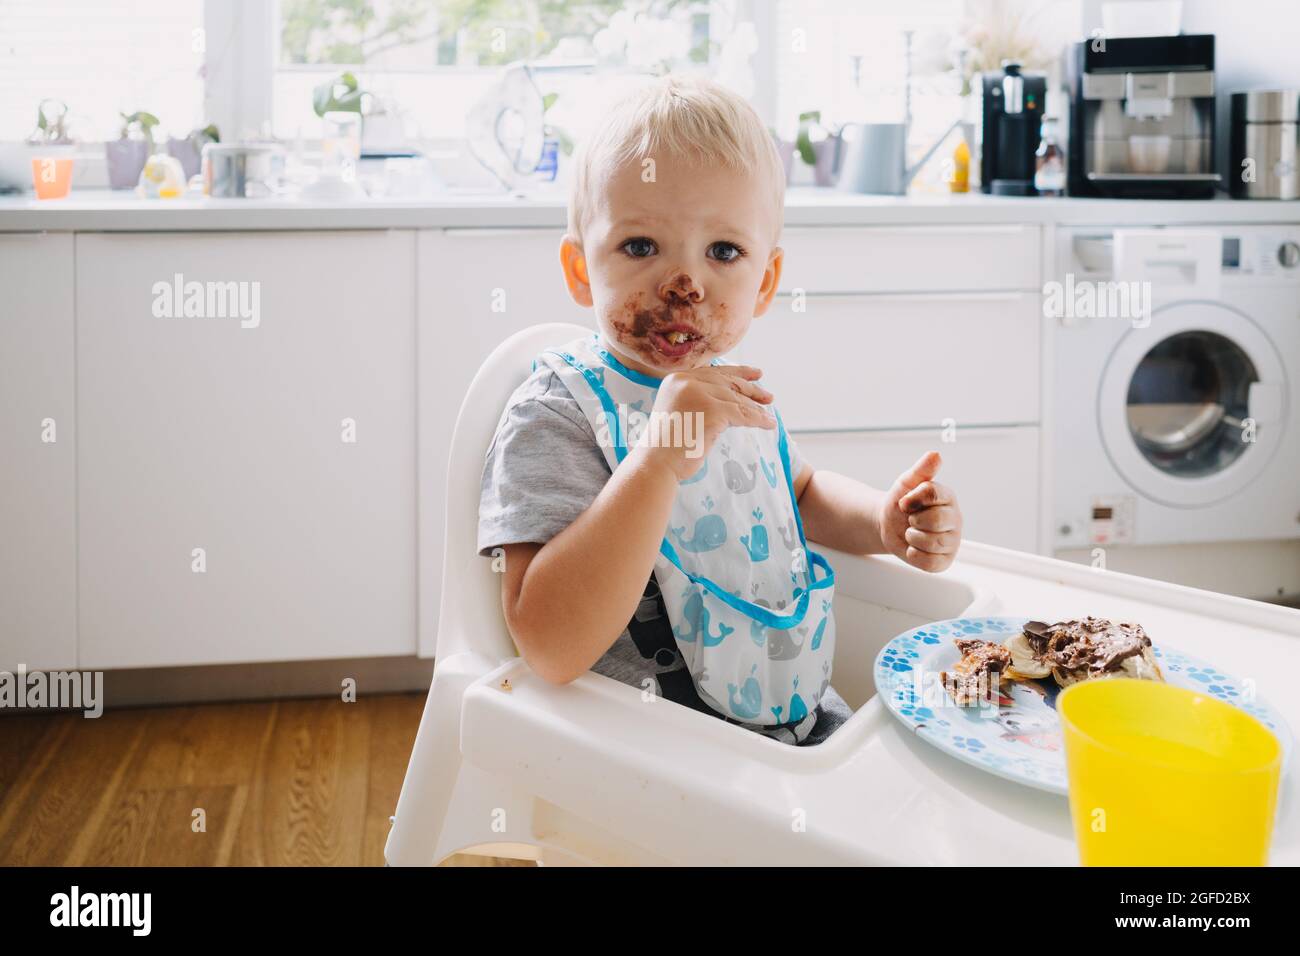 Adorable toddler with face covered in chocolate Stock Photo